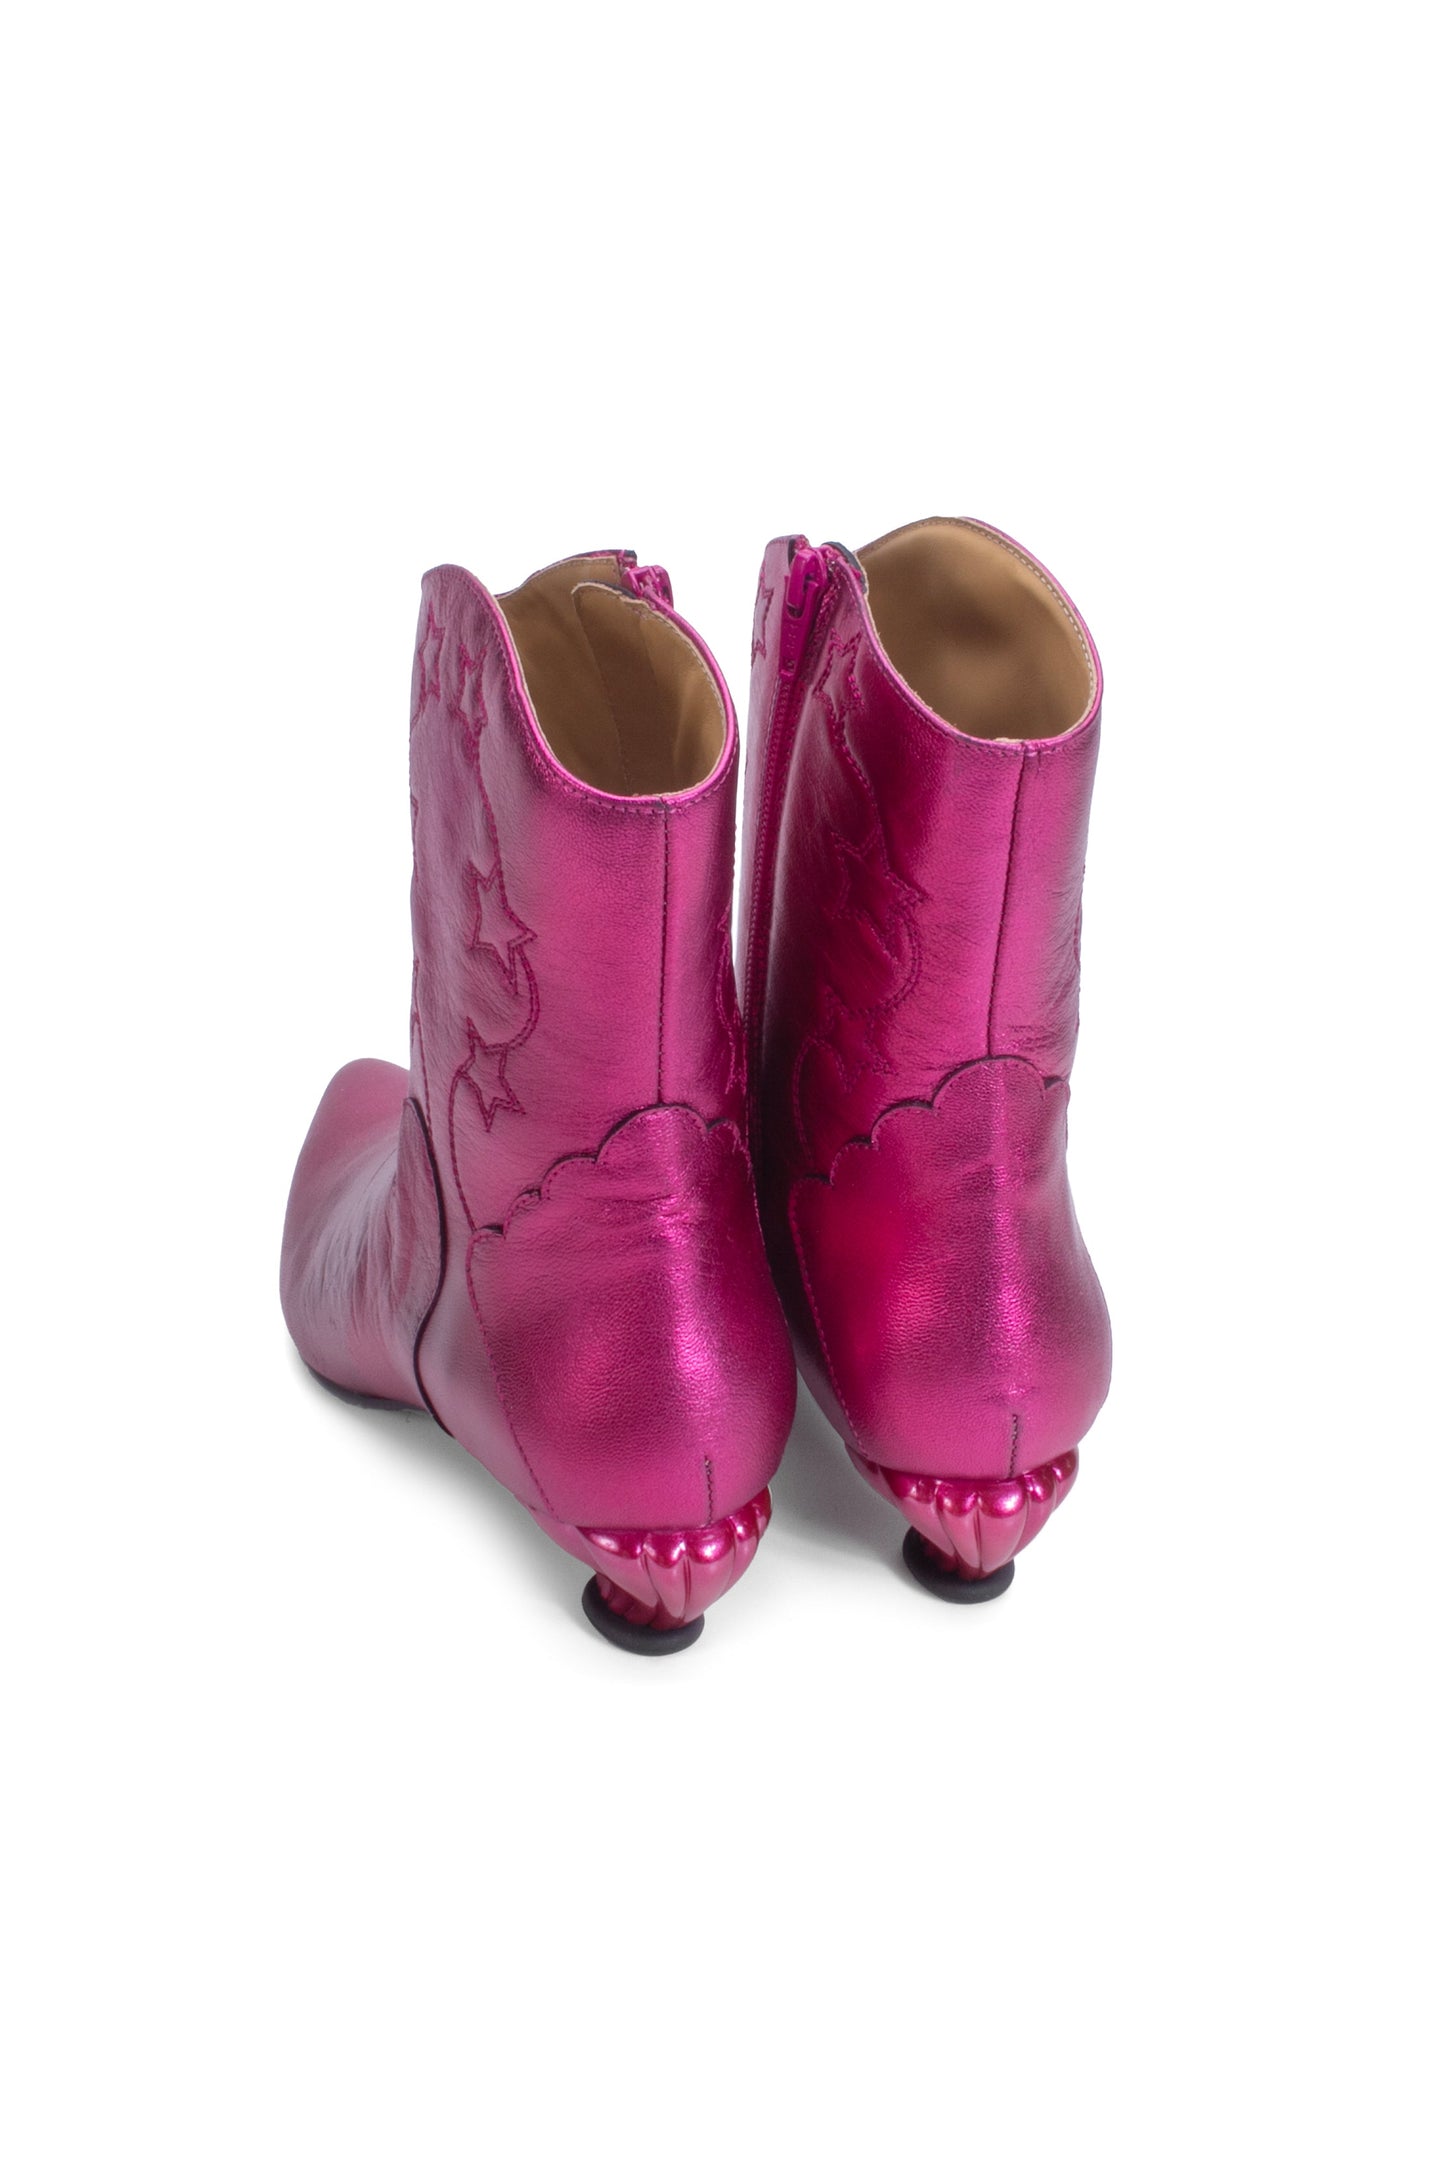 Metallic Azalea Carefully stitched crafted boots with the same pattern on the ankles and front part